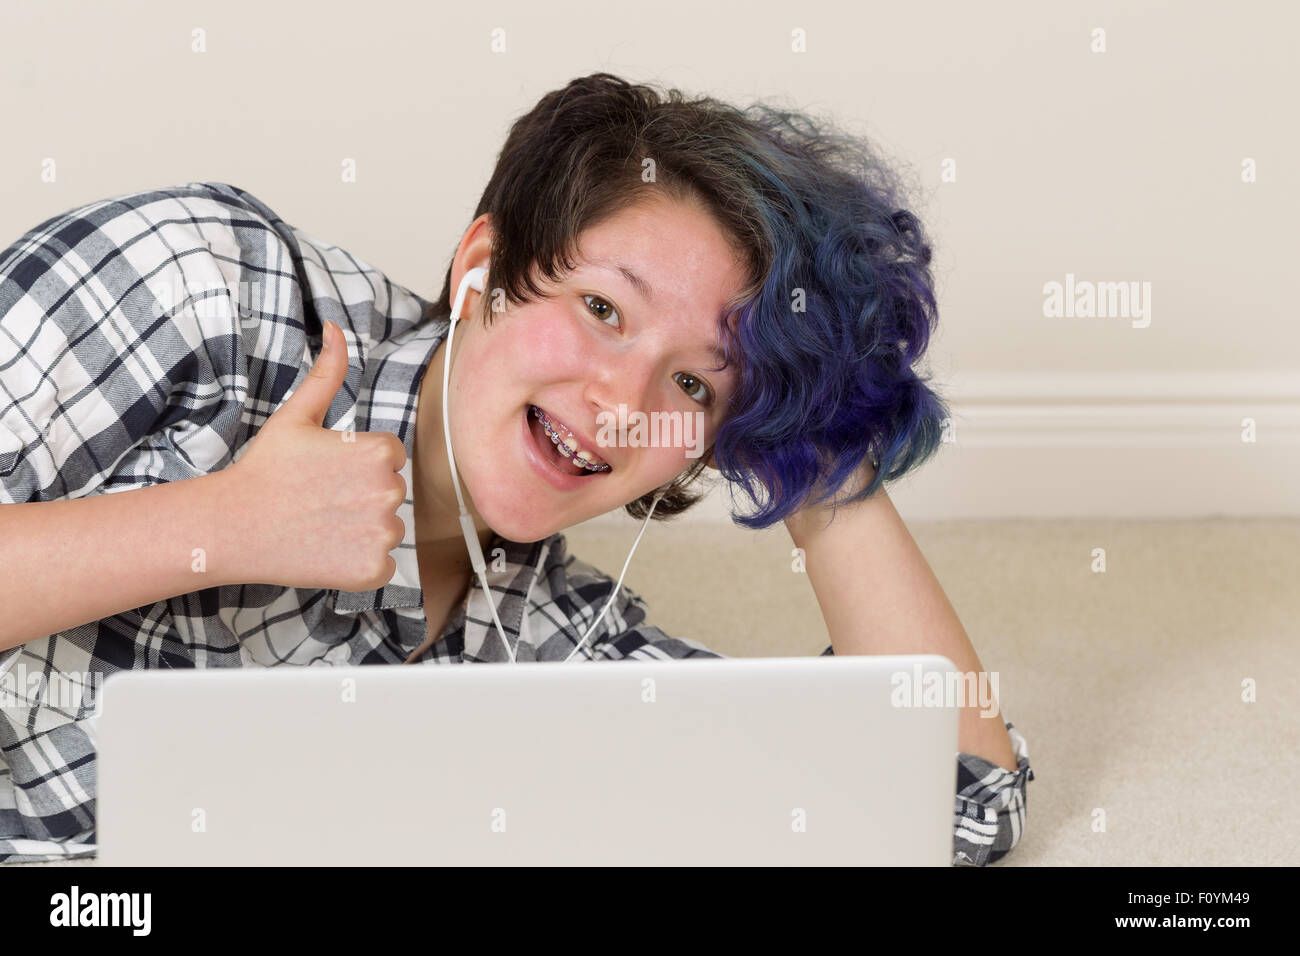 Smiling teen girl, looking forward, giving thumbs up while using computer and listening to music at home. Stock Photo